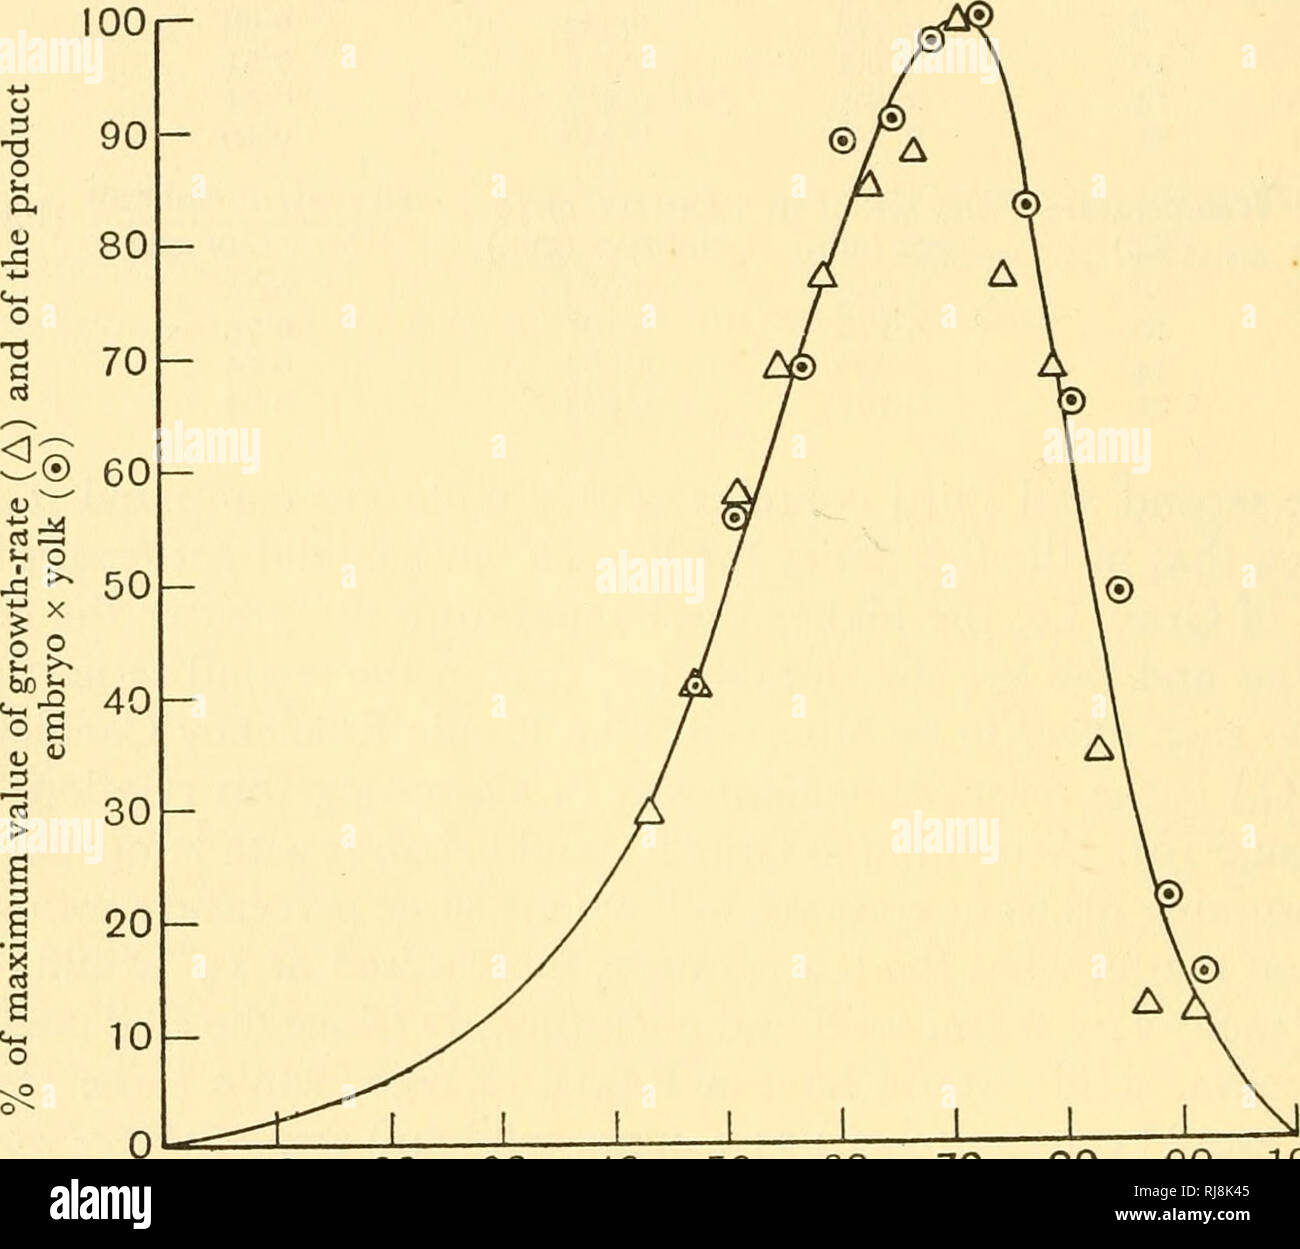 Chemical embryology. Embryology. 4o8 ON INCREASE IN SIZE [PT. Ill shown in  Fig. 45. And the growth-rate per gram of embryo (Minot growth-rate divided  by 100?) was also proportional to the